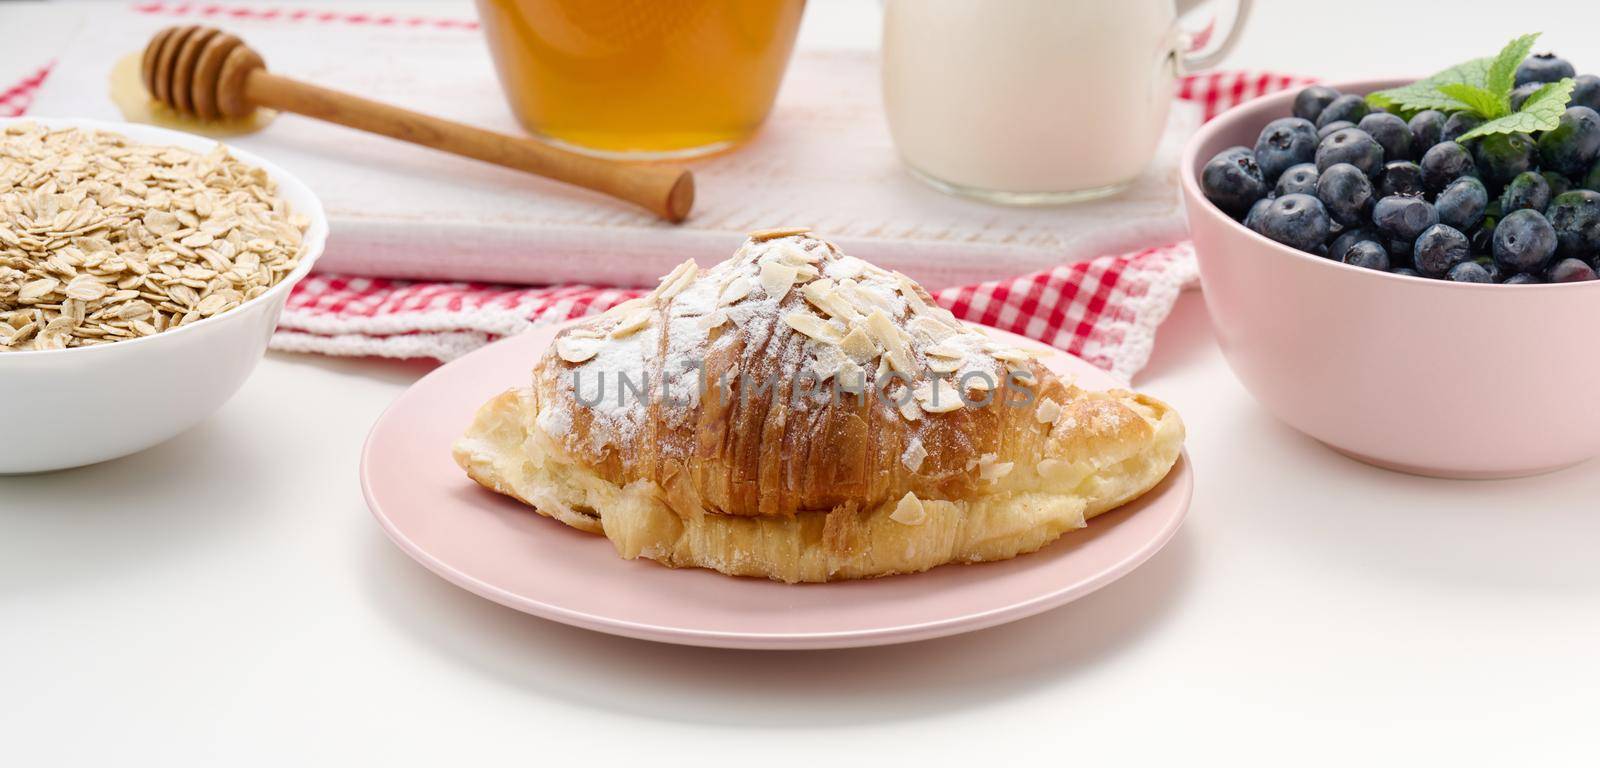 baked croissant sprinkled with powdered sugar, blueberries and oatmeal in a ceramic plate on a white table, breakfast